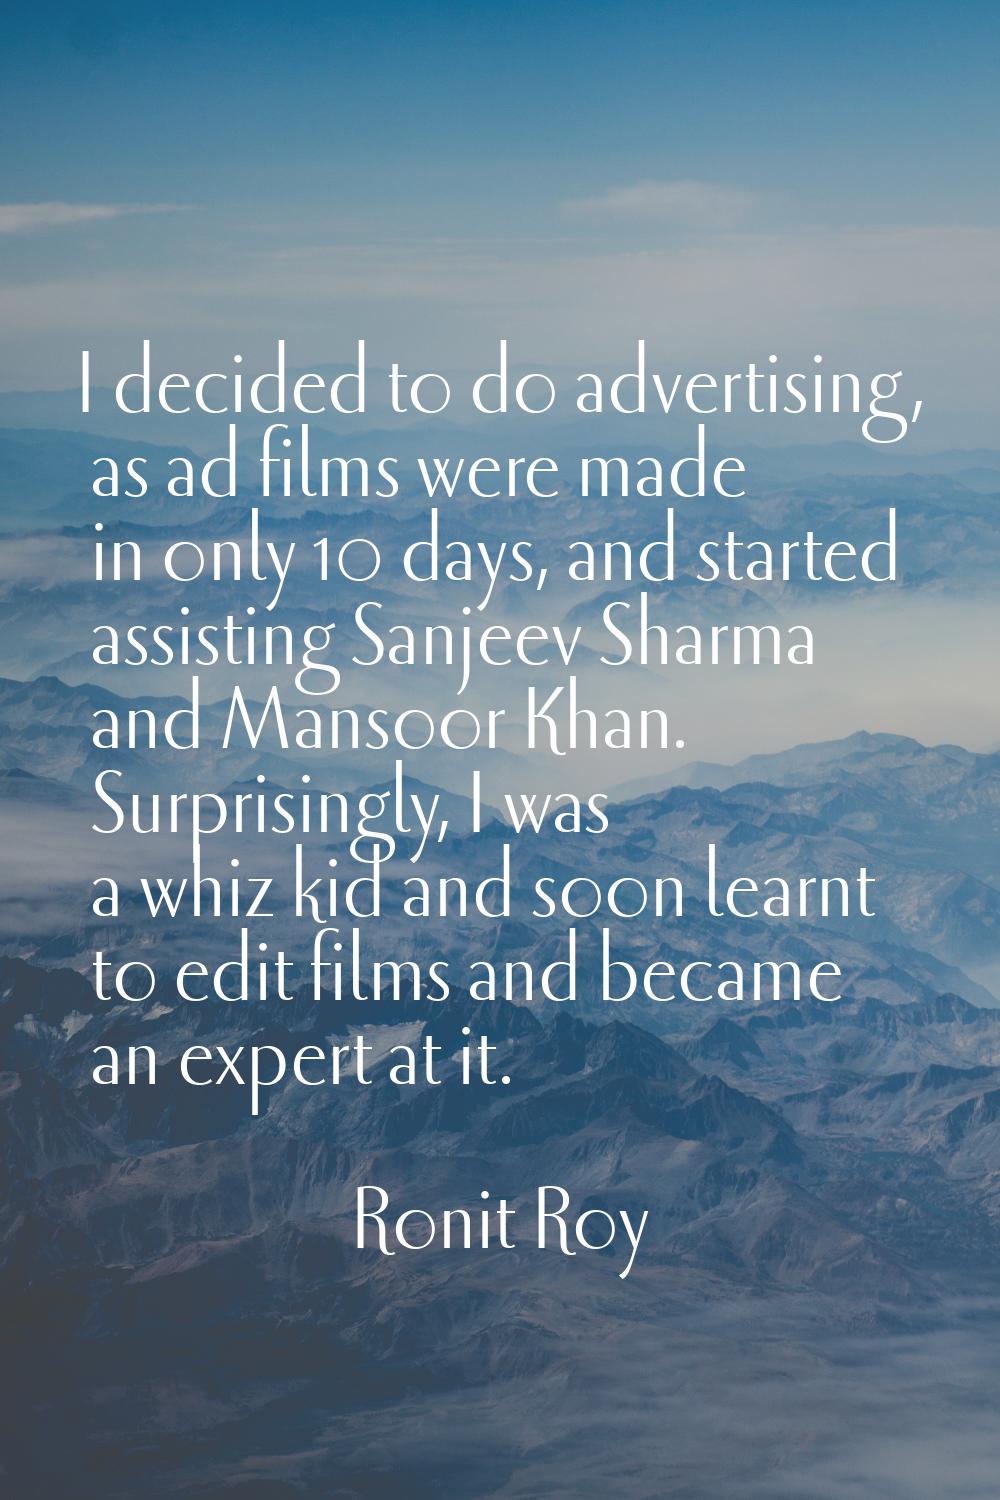 I decided to do advertising, as ad films were made in only 10 days, and started assisting Sanjeev S